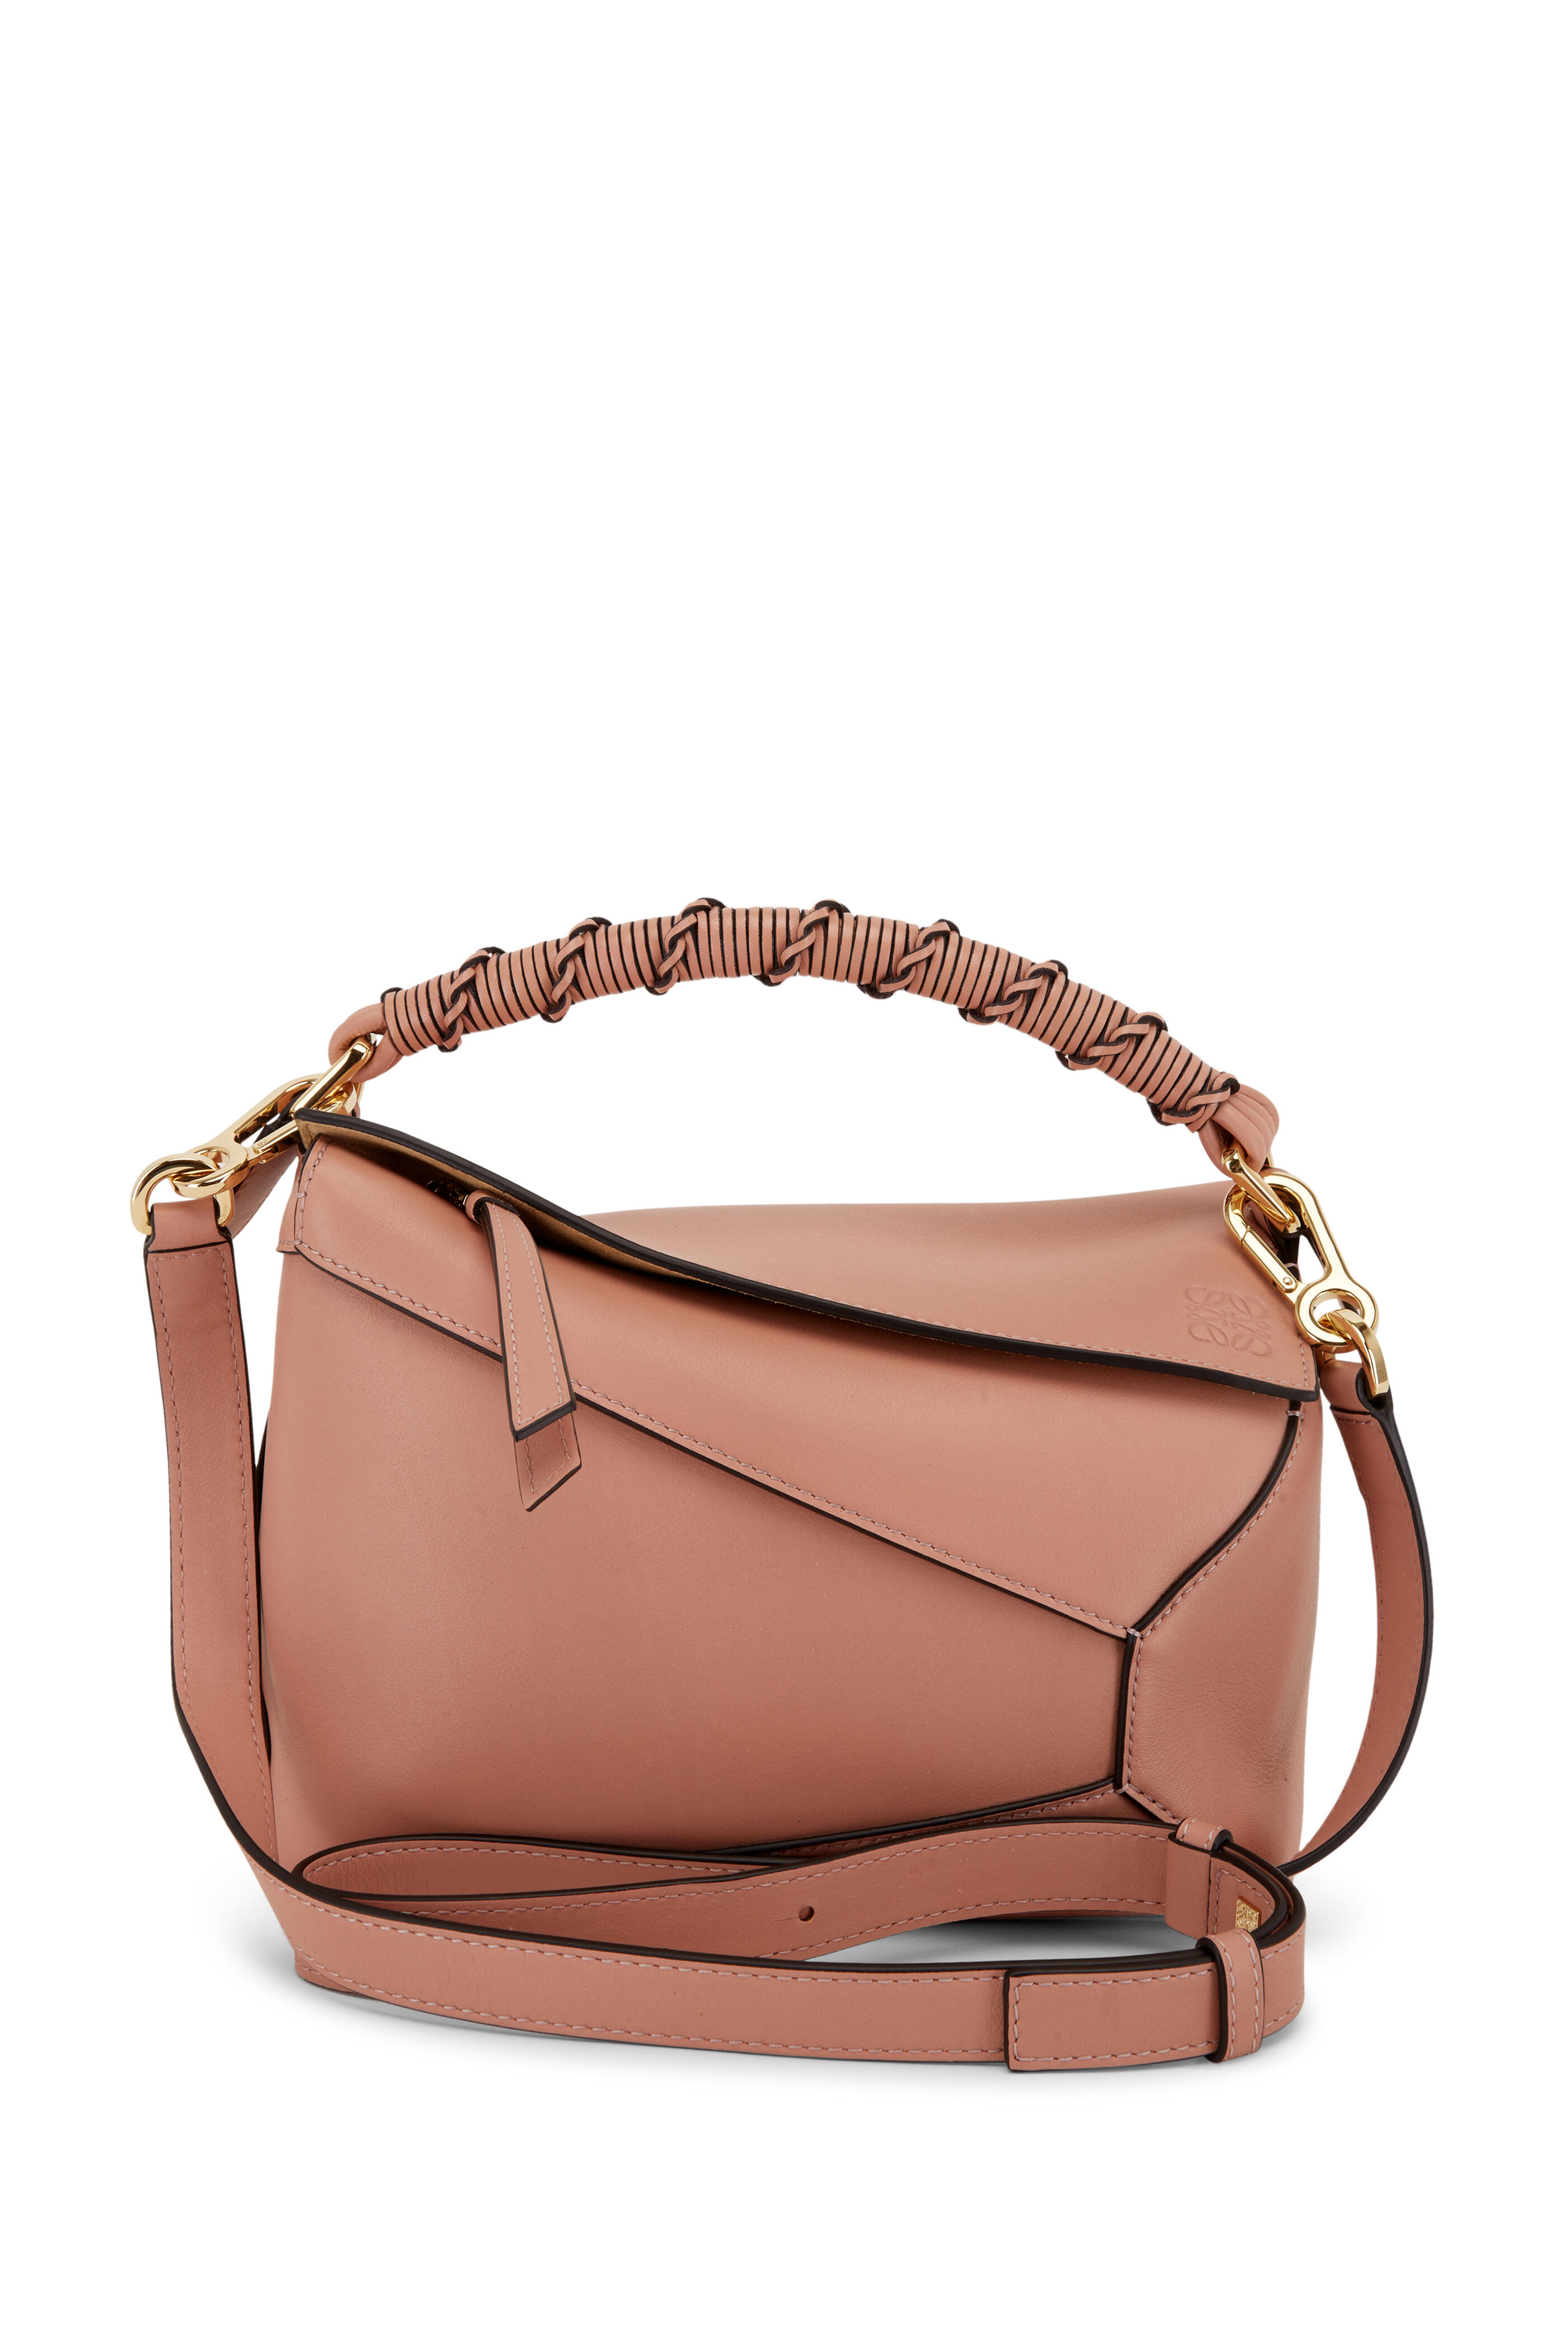 LOEWE Small Leather Puzzle Edge Top-Handle Bag